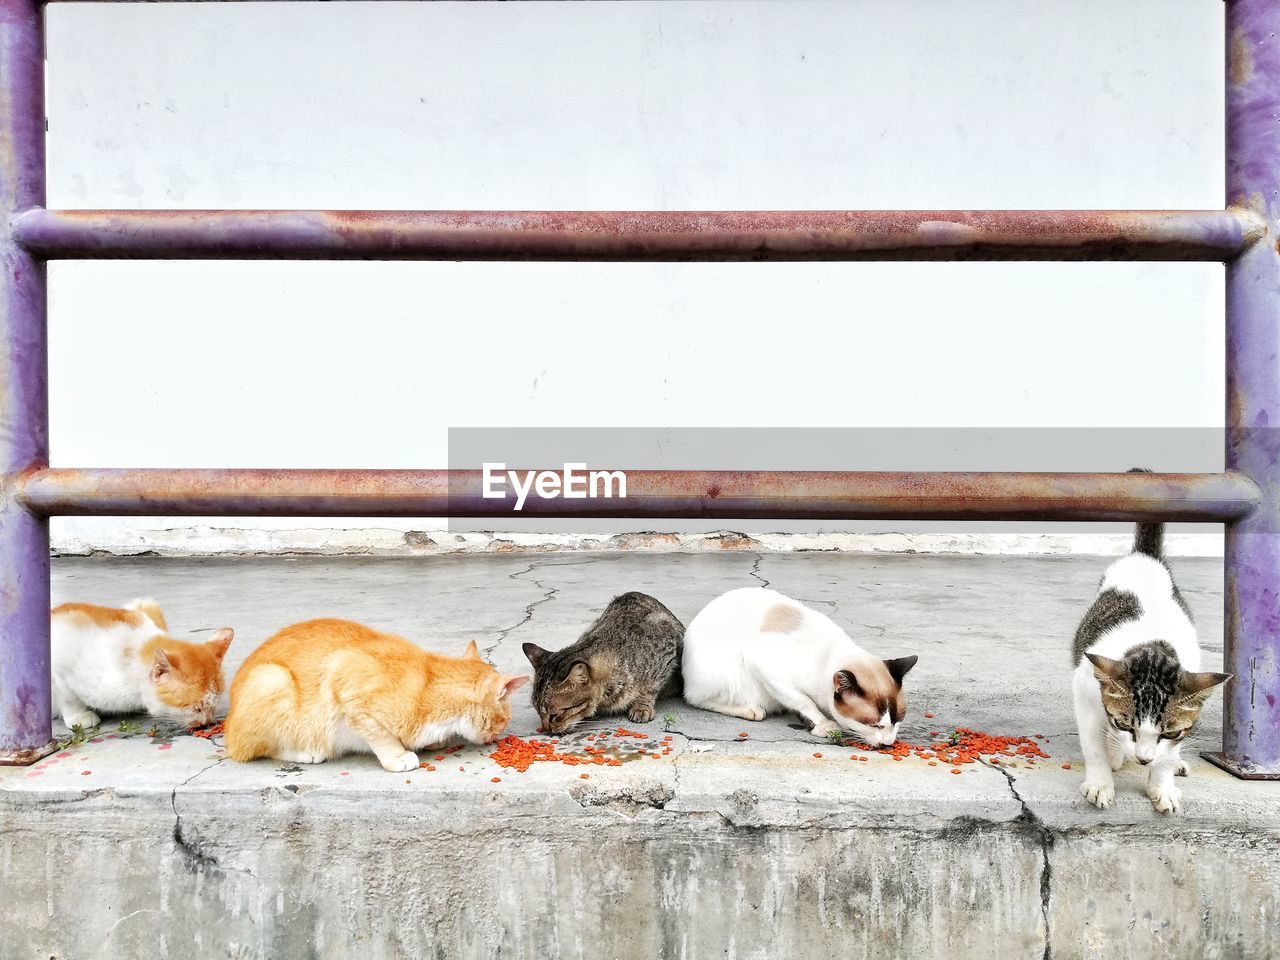 Cats eating food on retaining wall